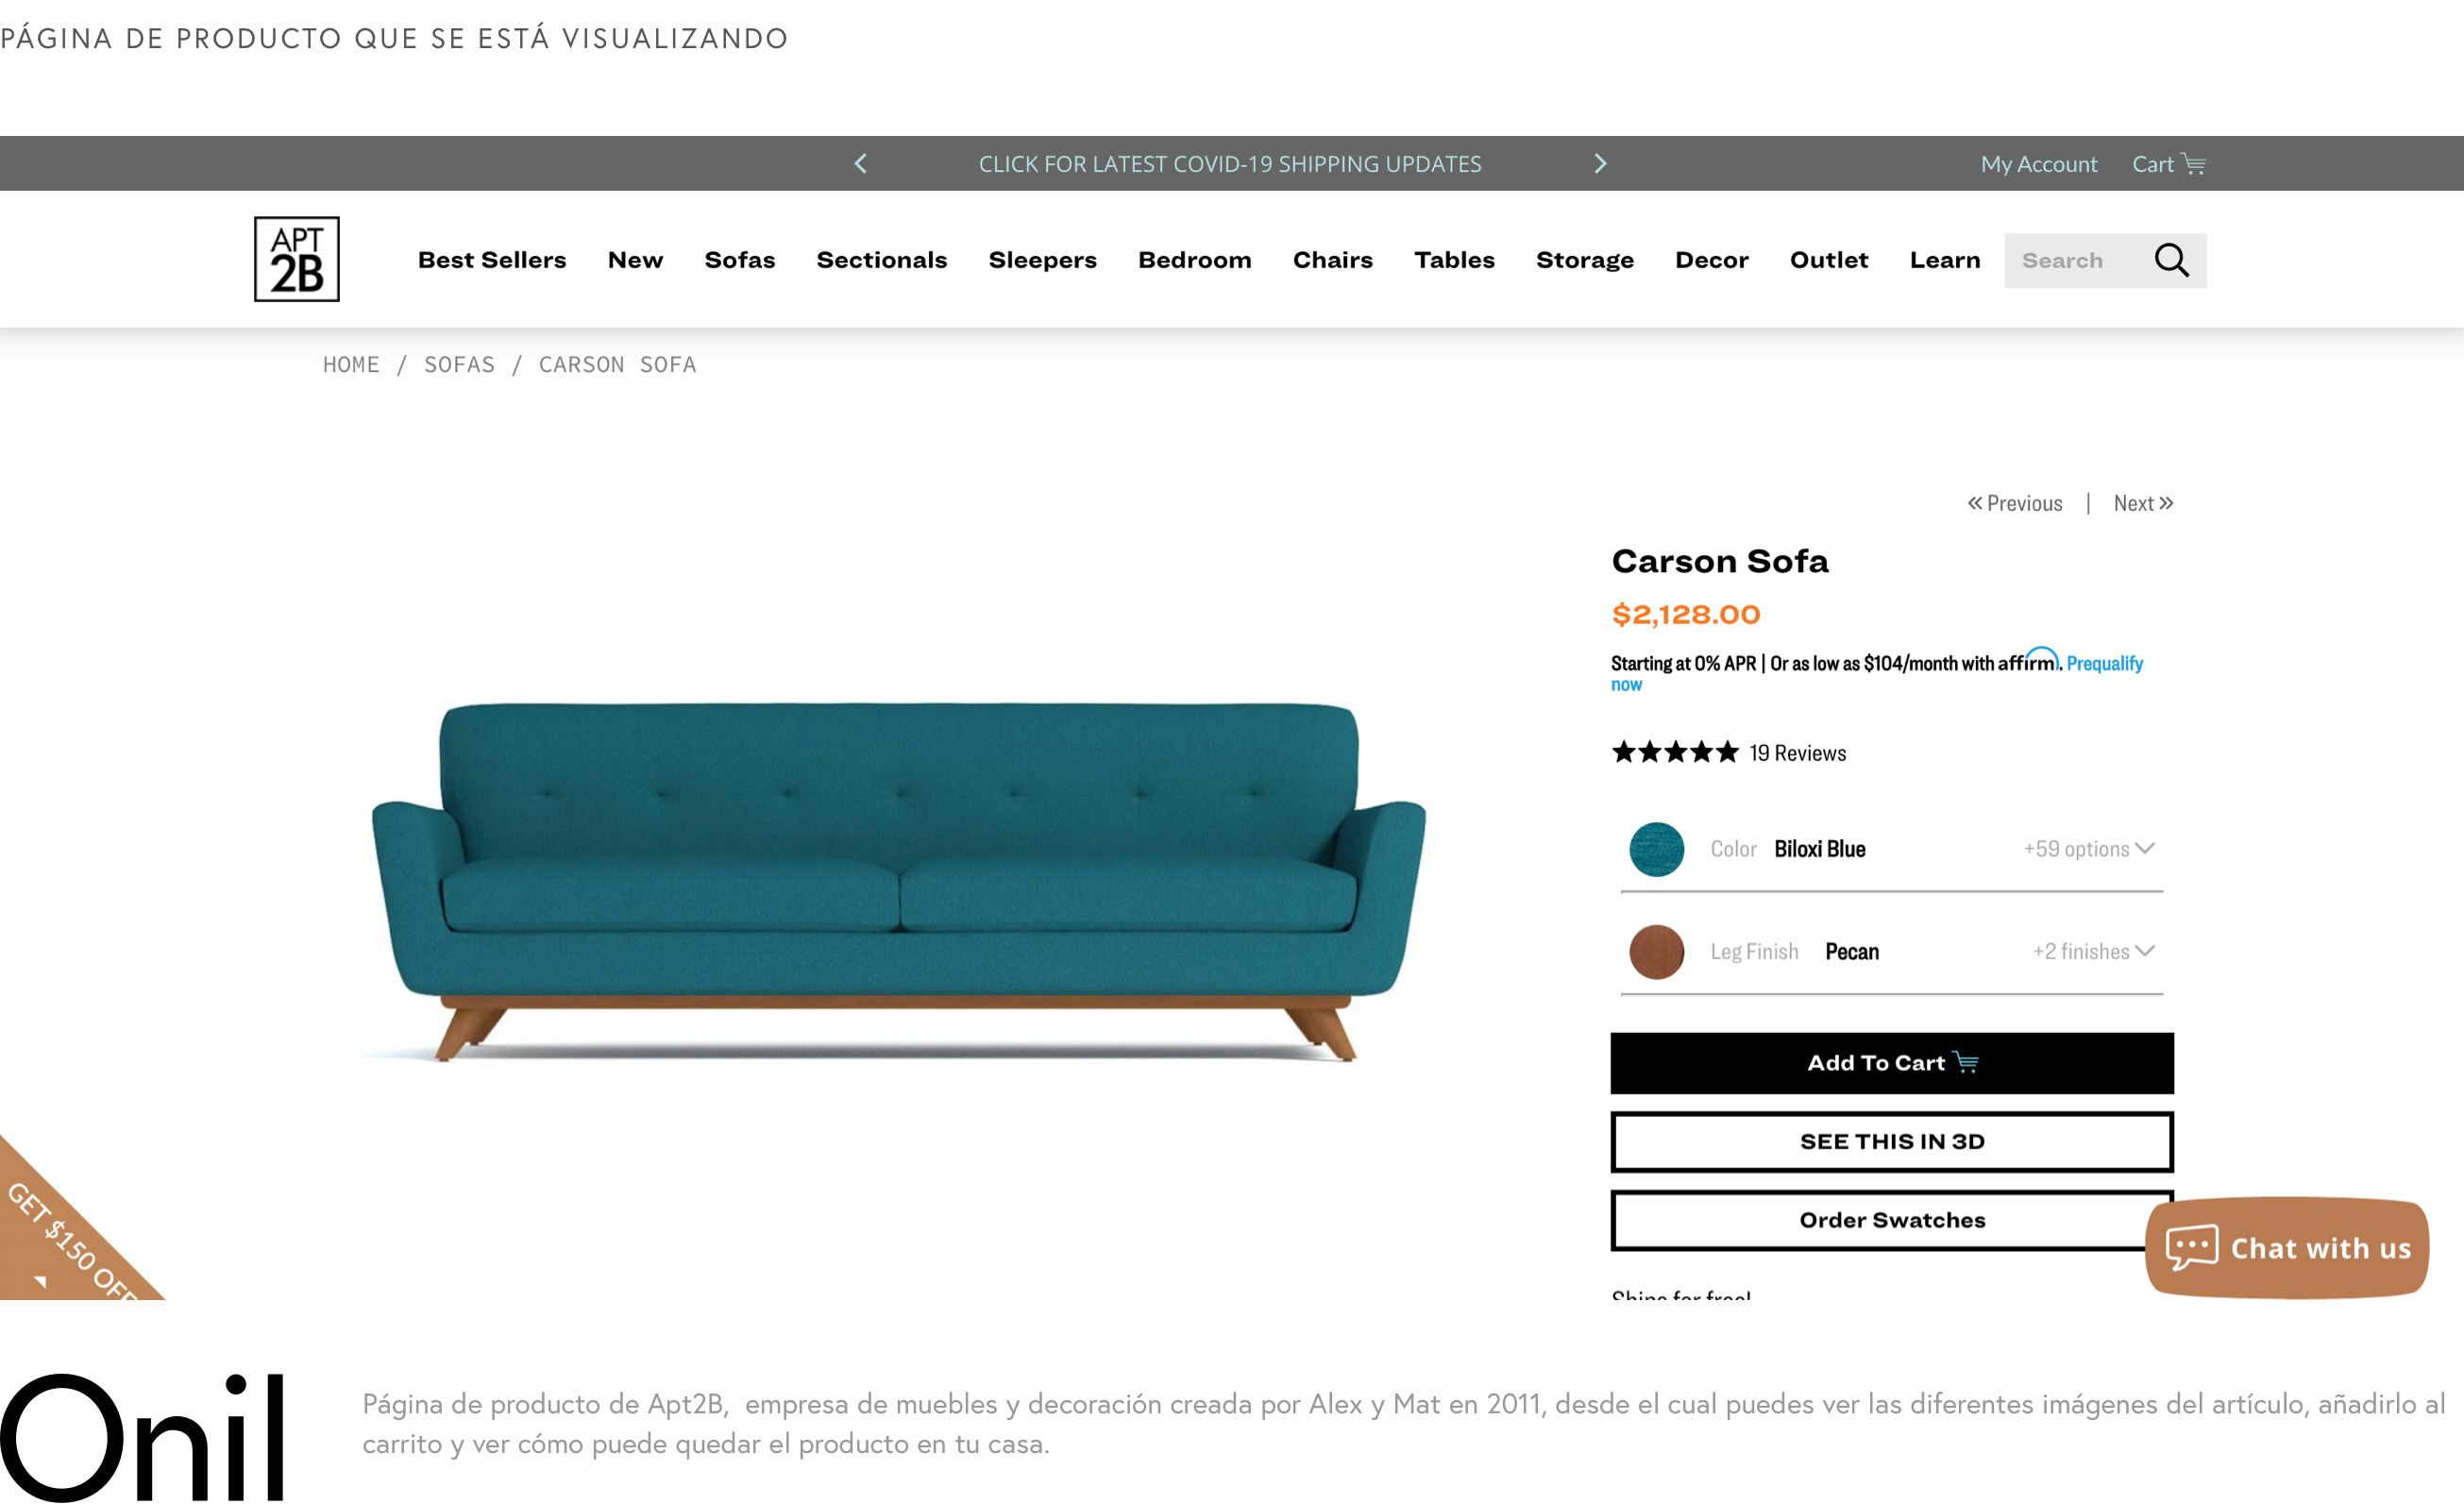 Product page being viewed - Apt2B product page, a furniture and decoration company created by Alex and Mat in 2011, from which you can see the different images of the item, add it to the cart and see how the product can look in your home.